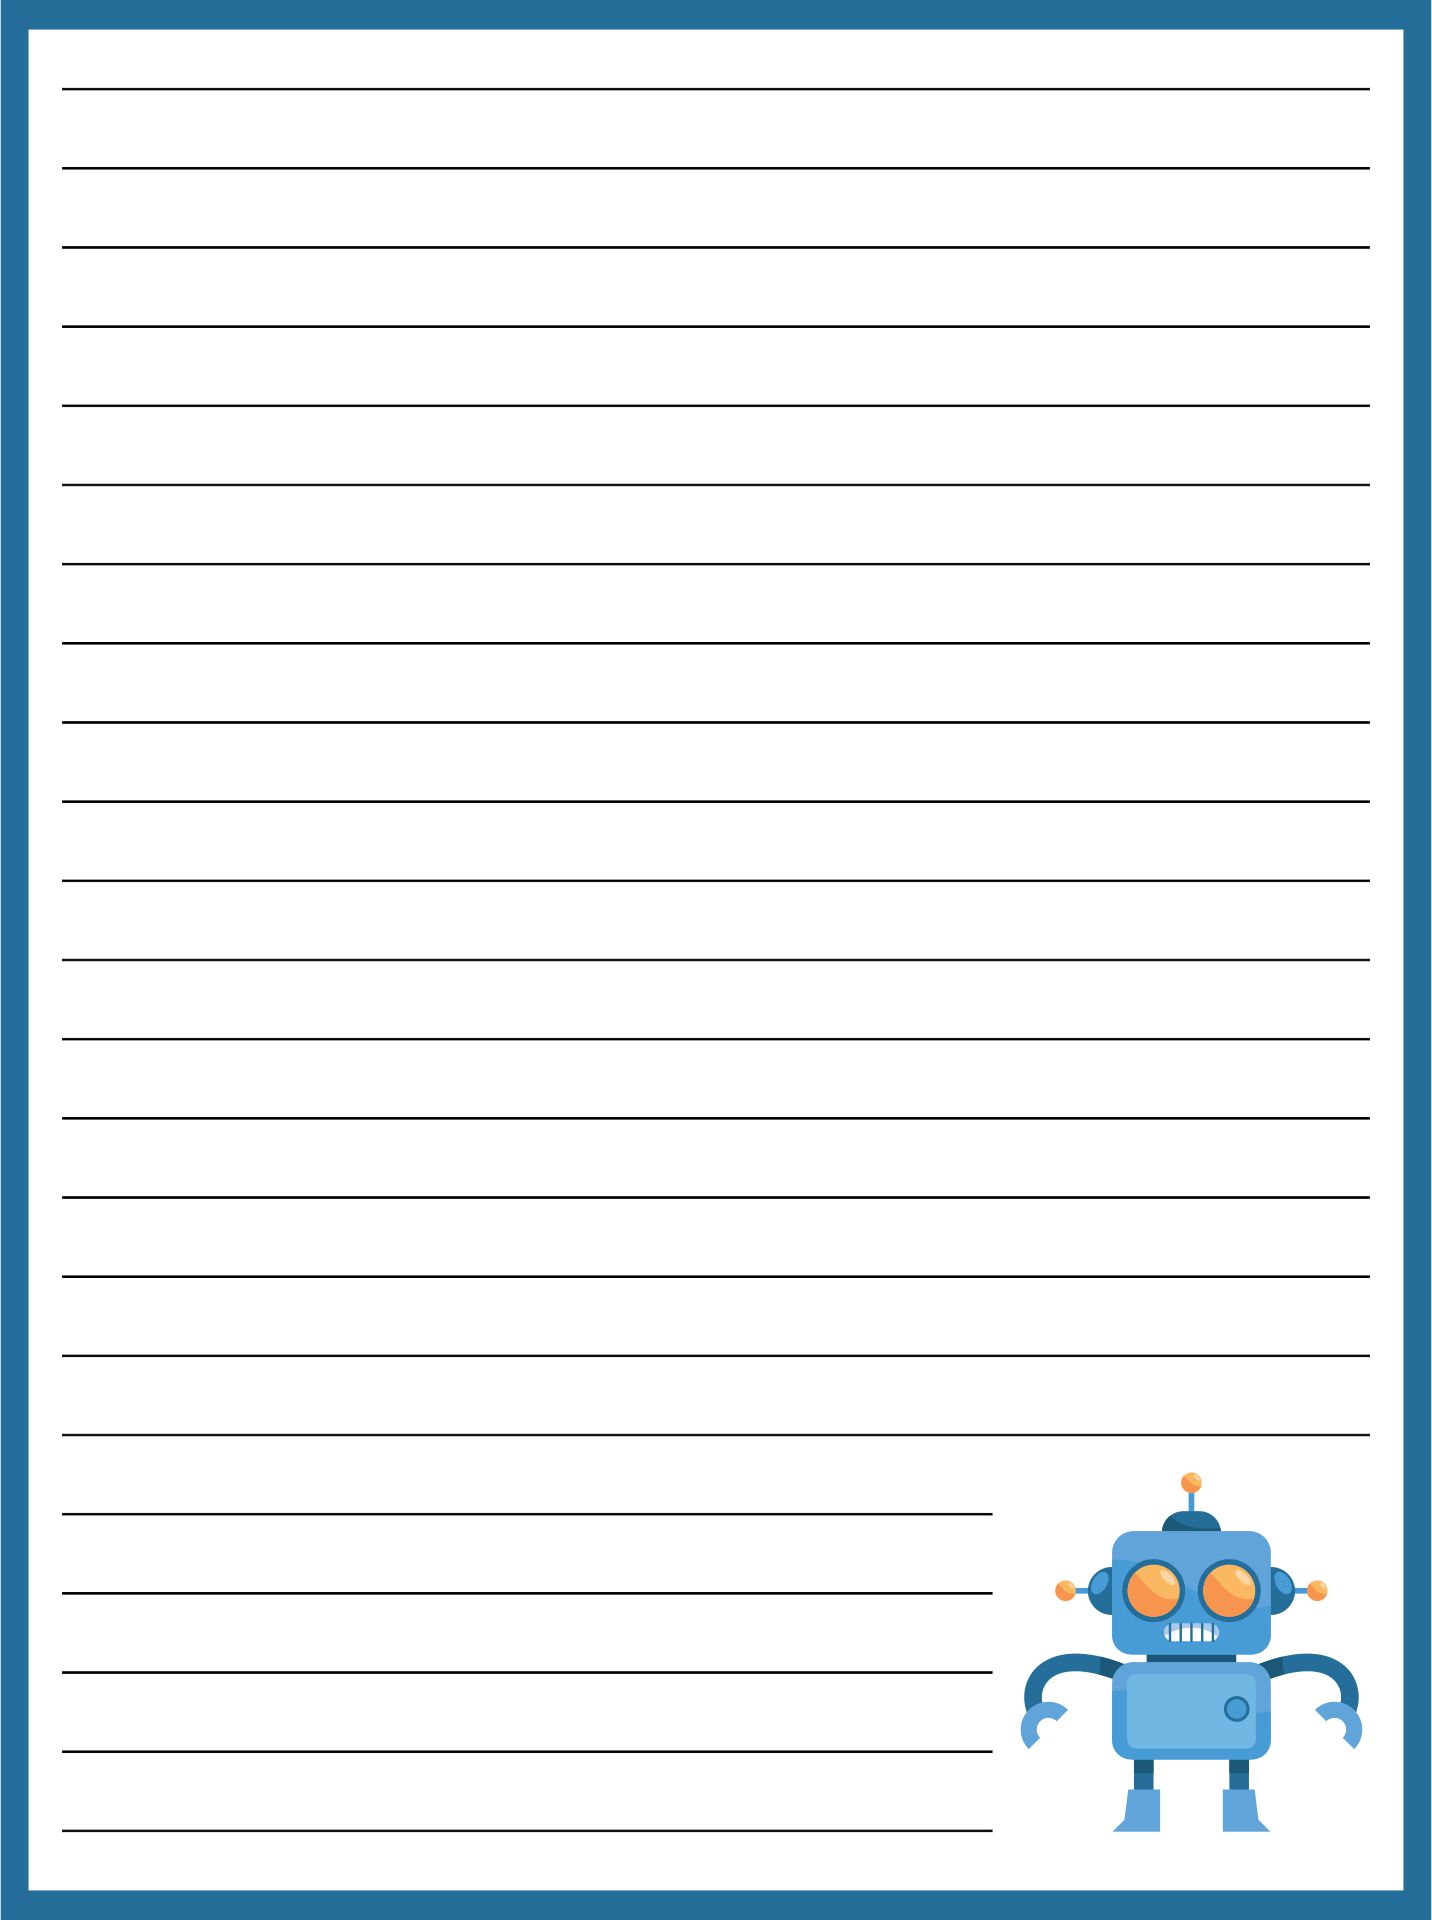 Free Printable Writing Paper With Lines And Borders